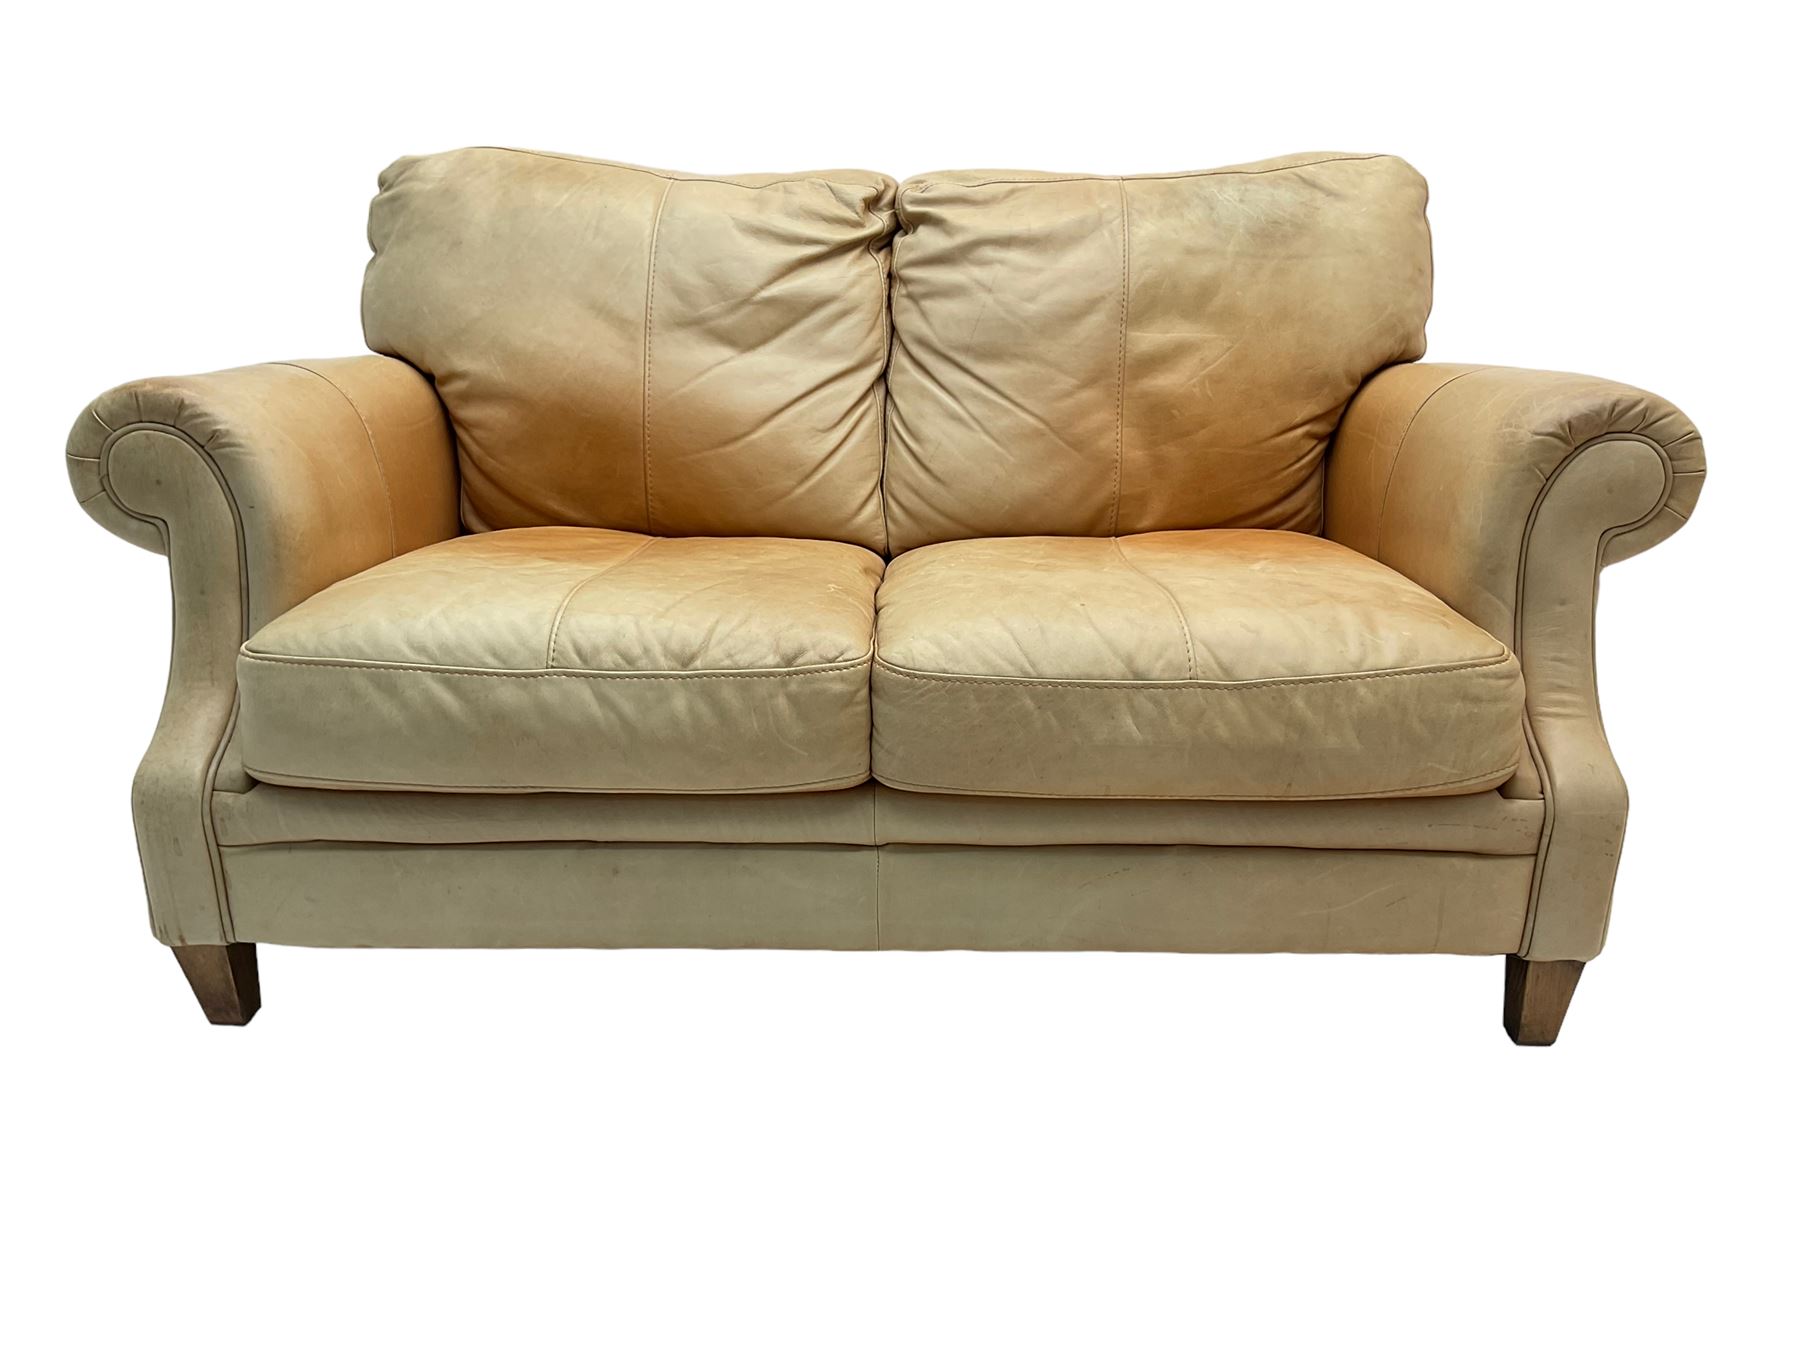 Two seat sofa, upholstered in pale tan leather with scrolled arms ...